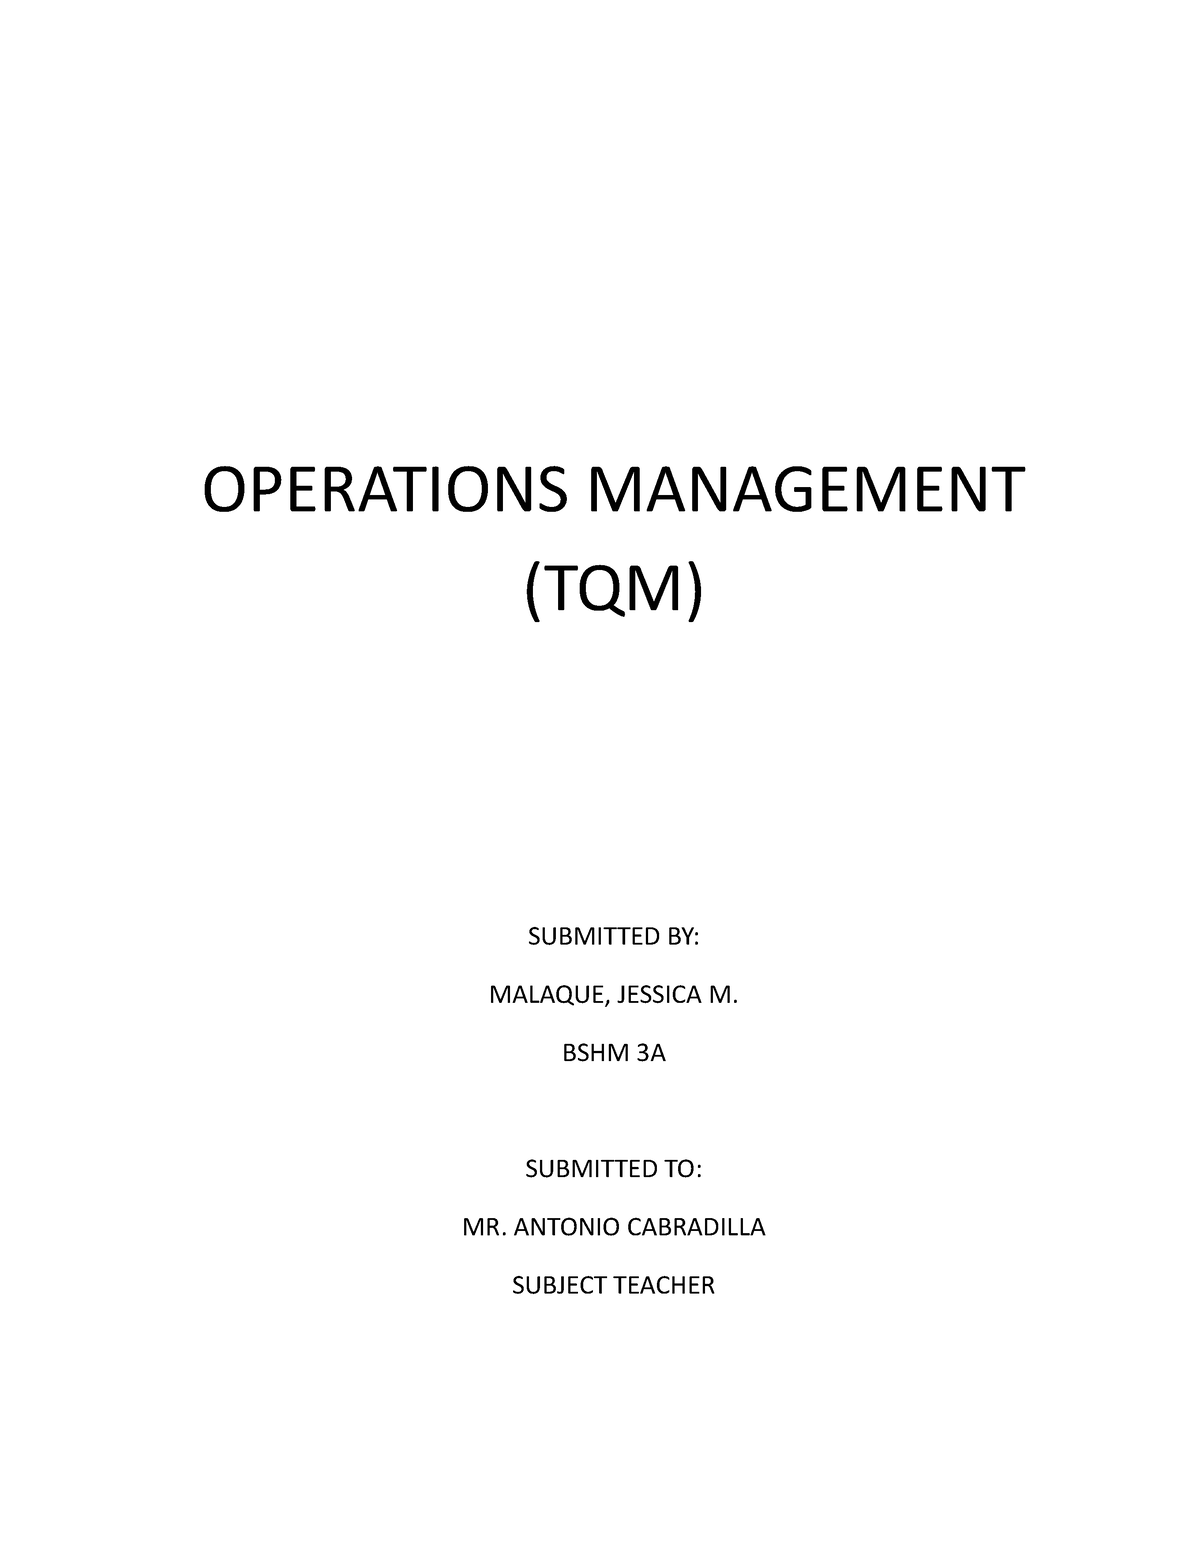 short case study on operations management